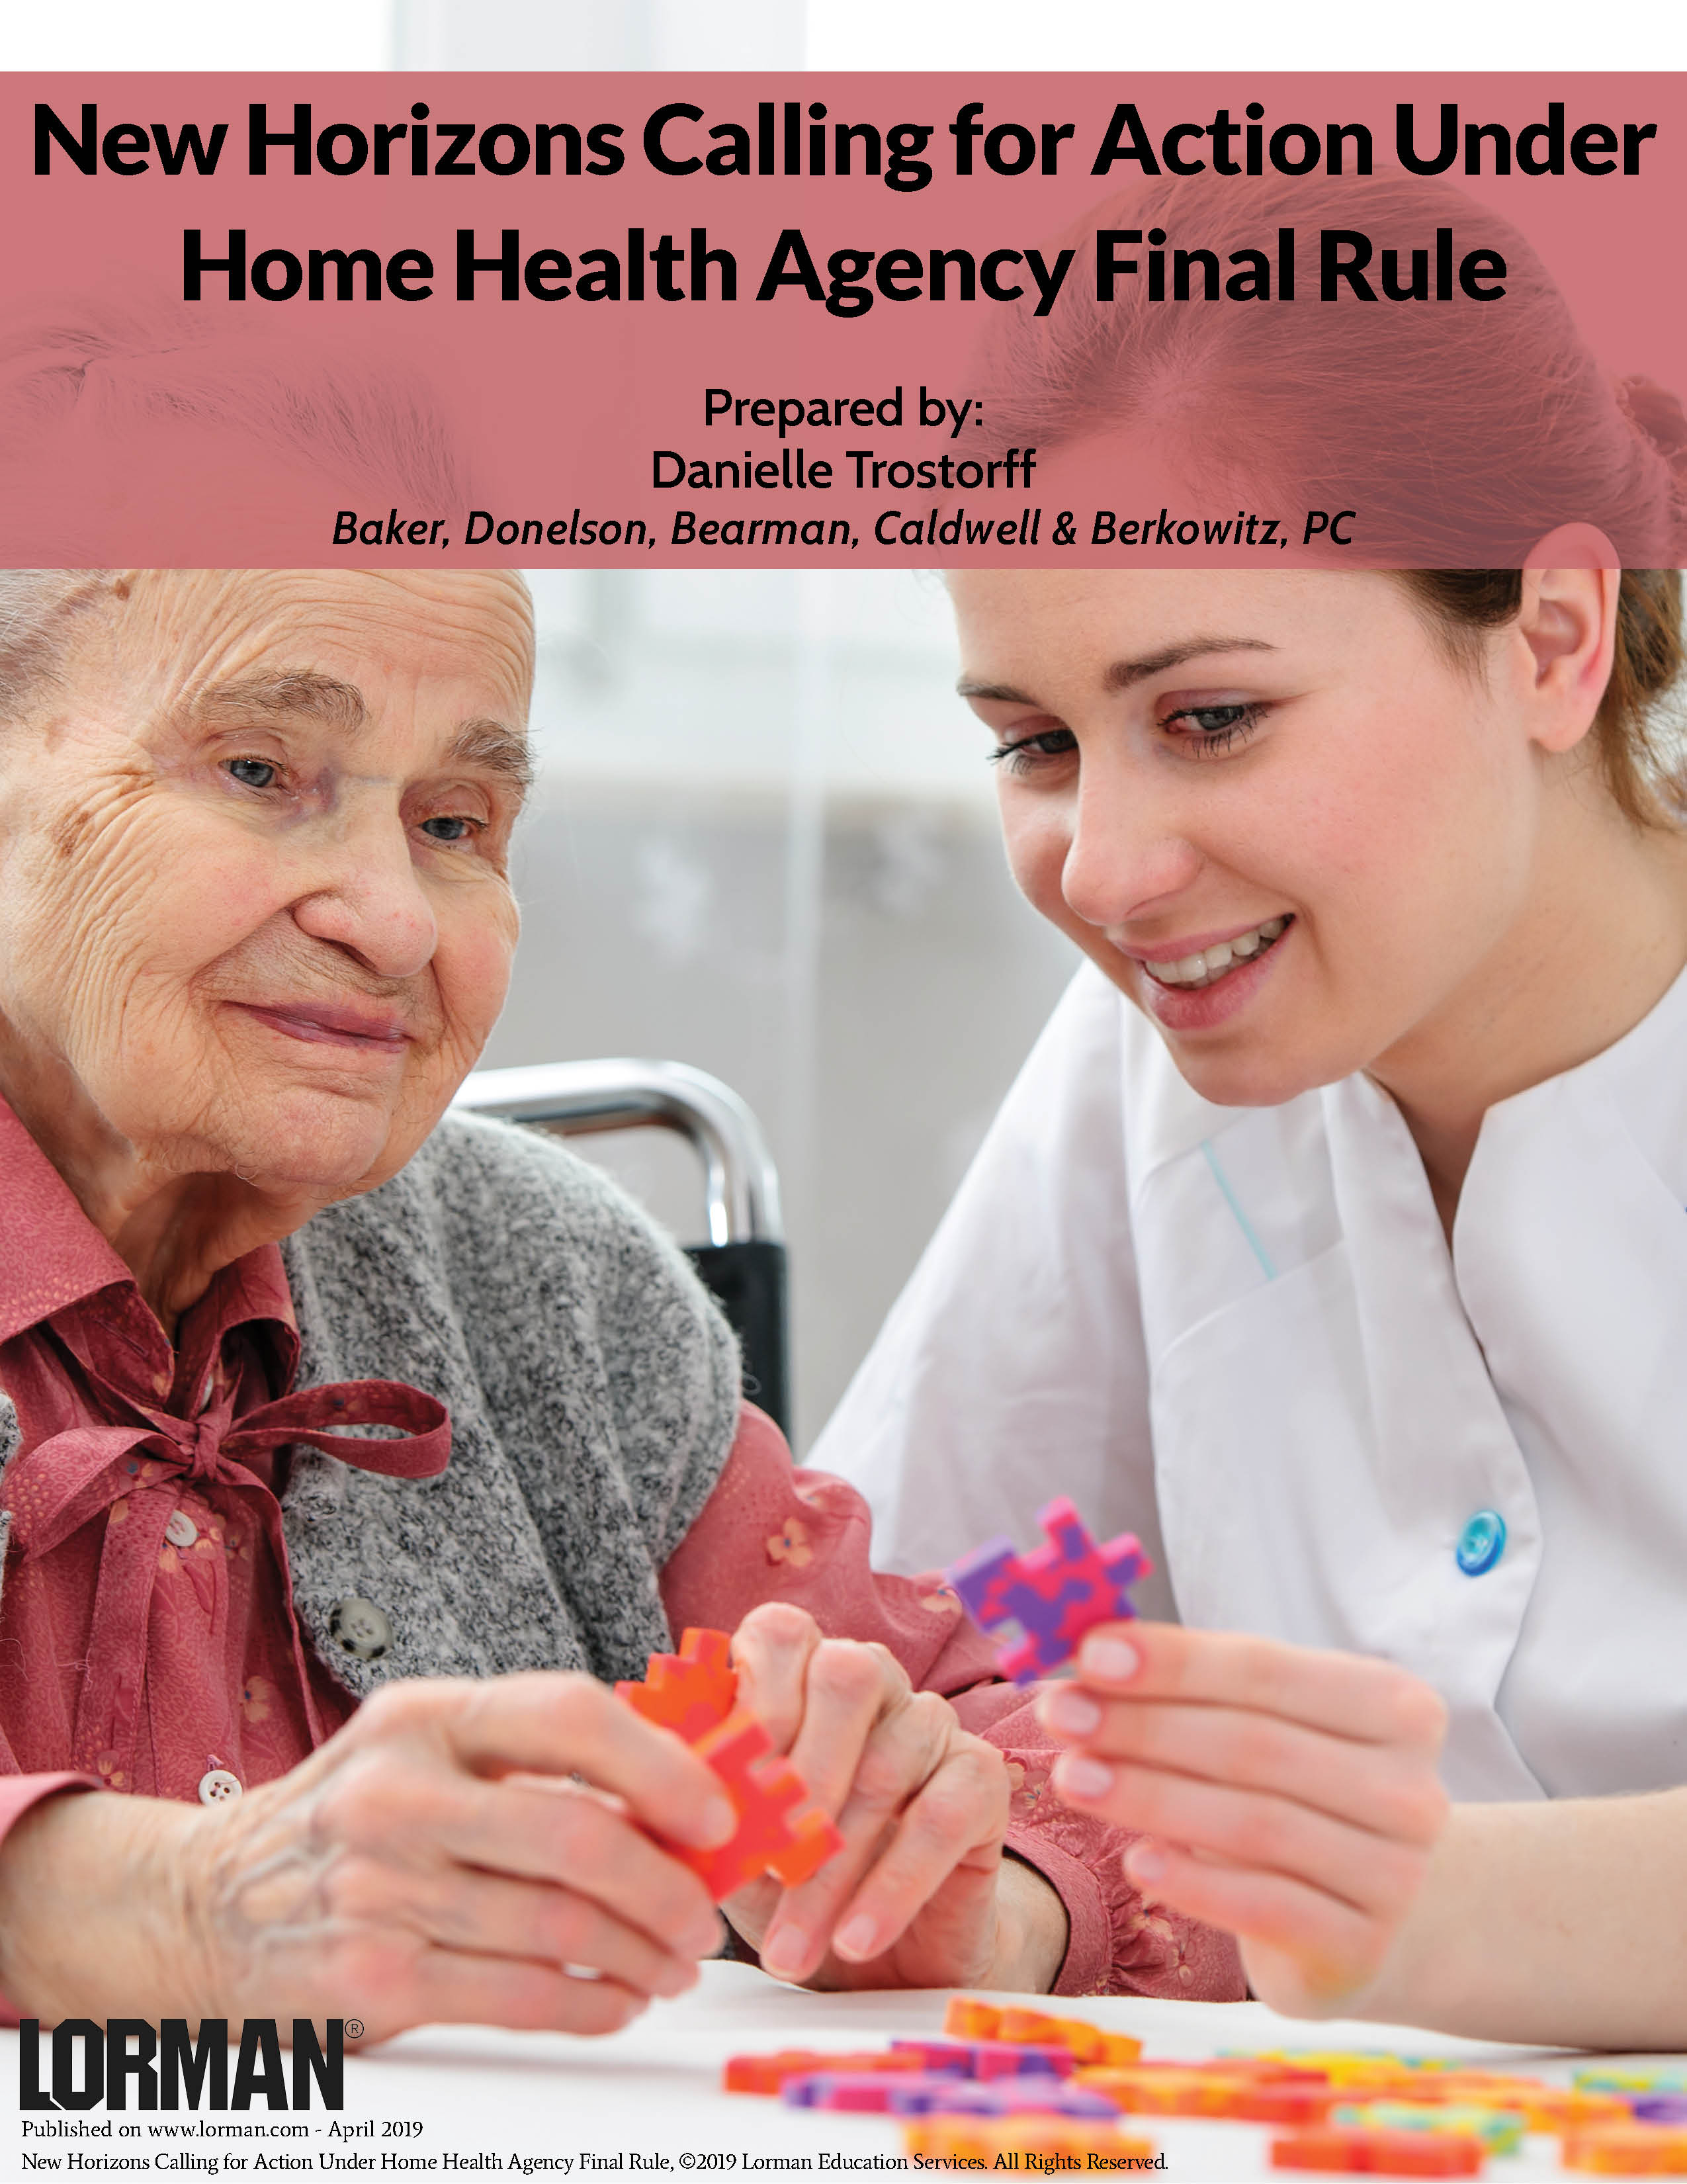 New Horizons Calling for Action Under Home Health Agency Final Rule